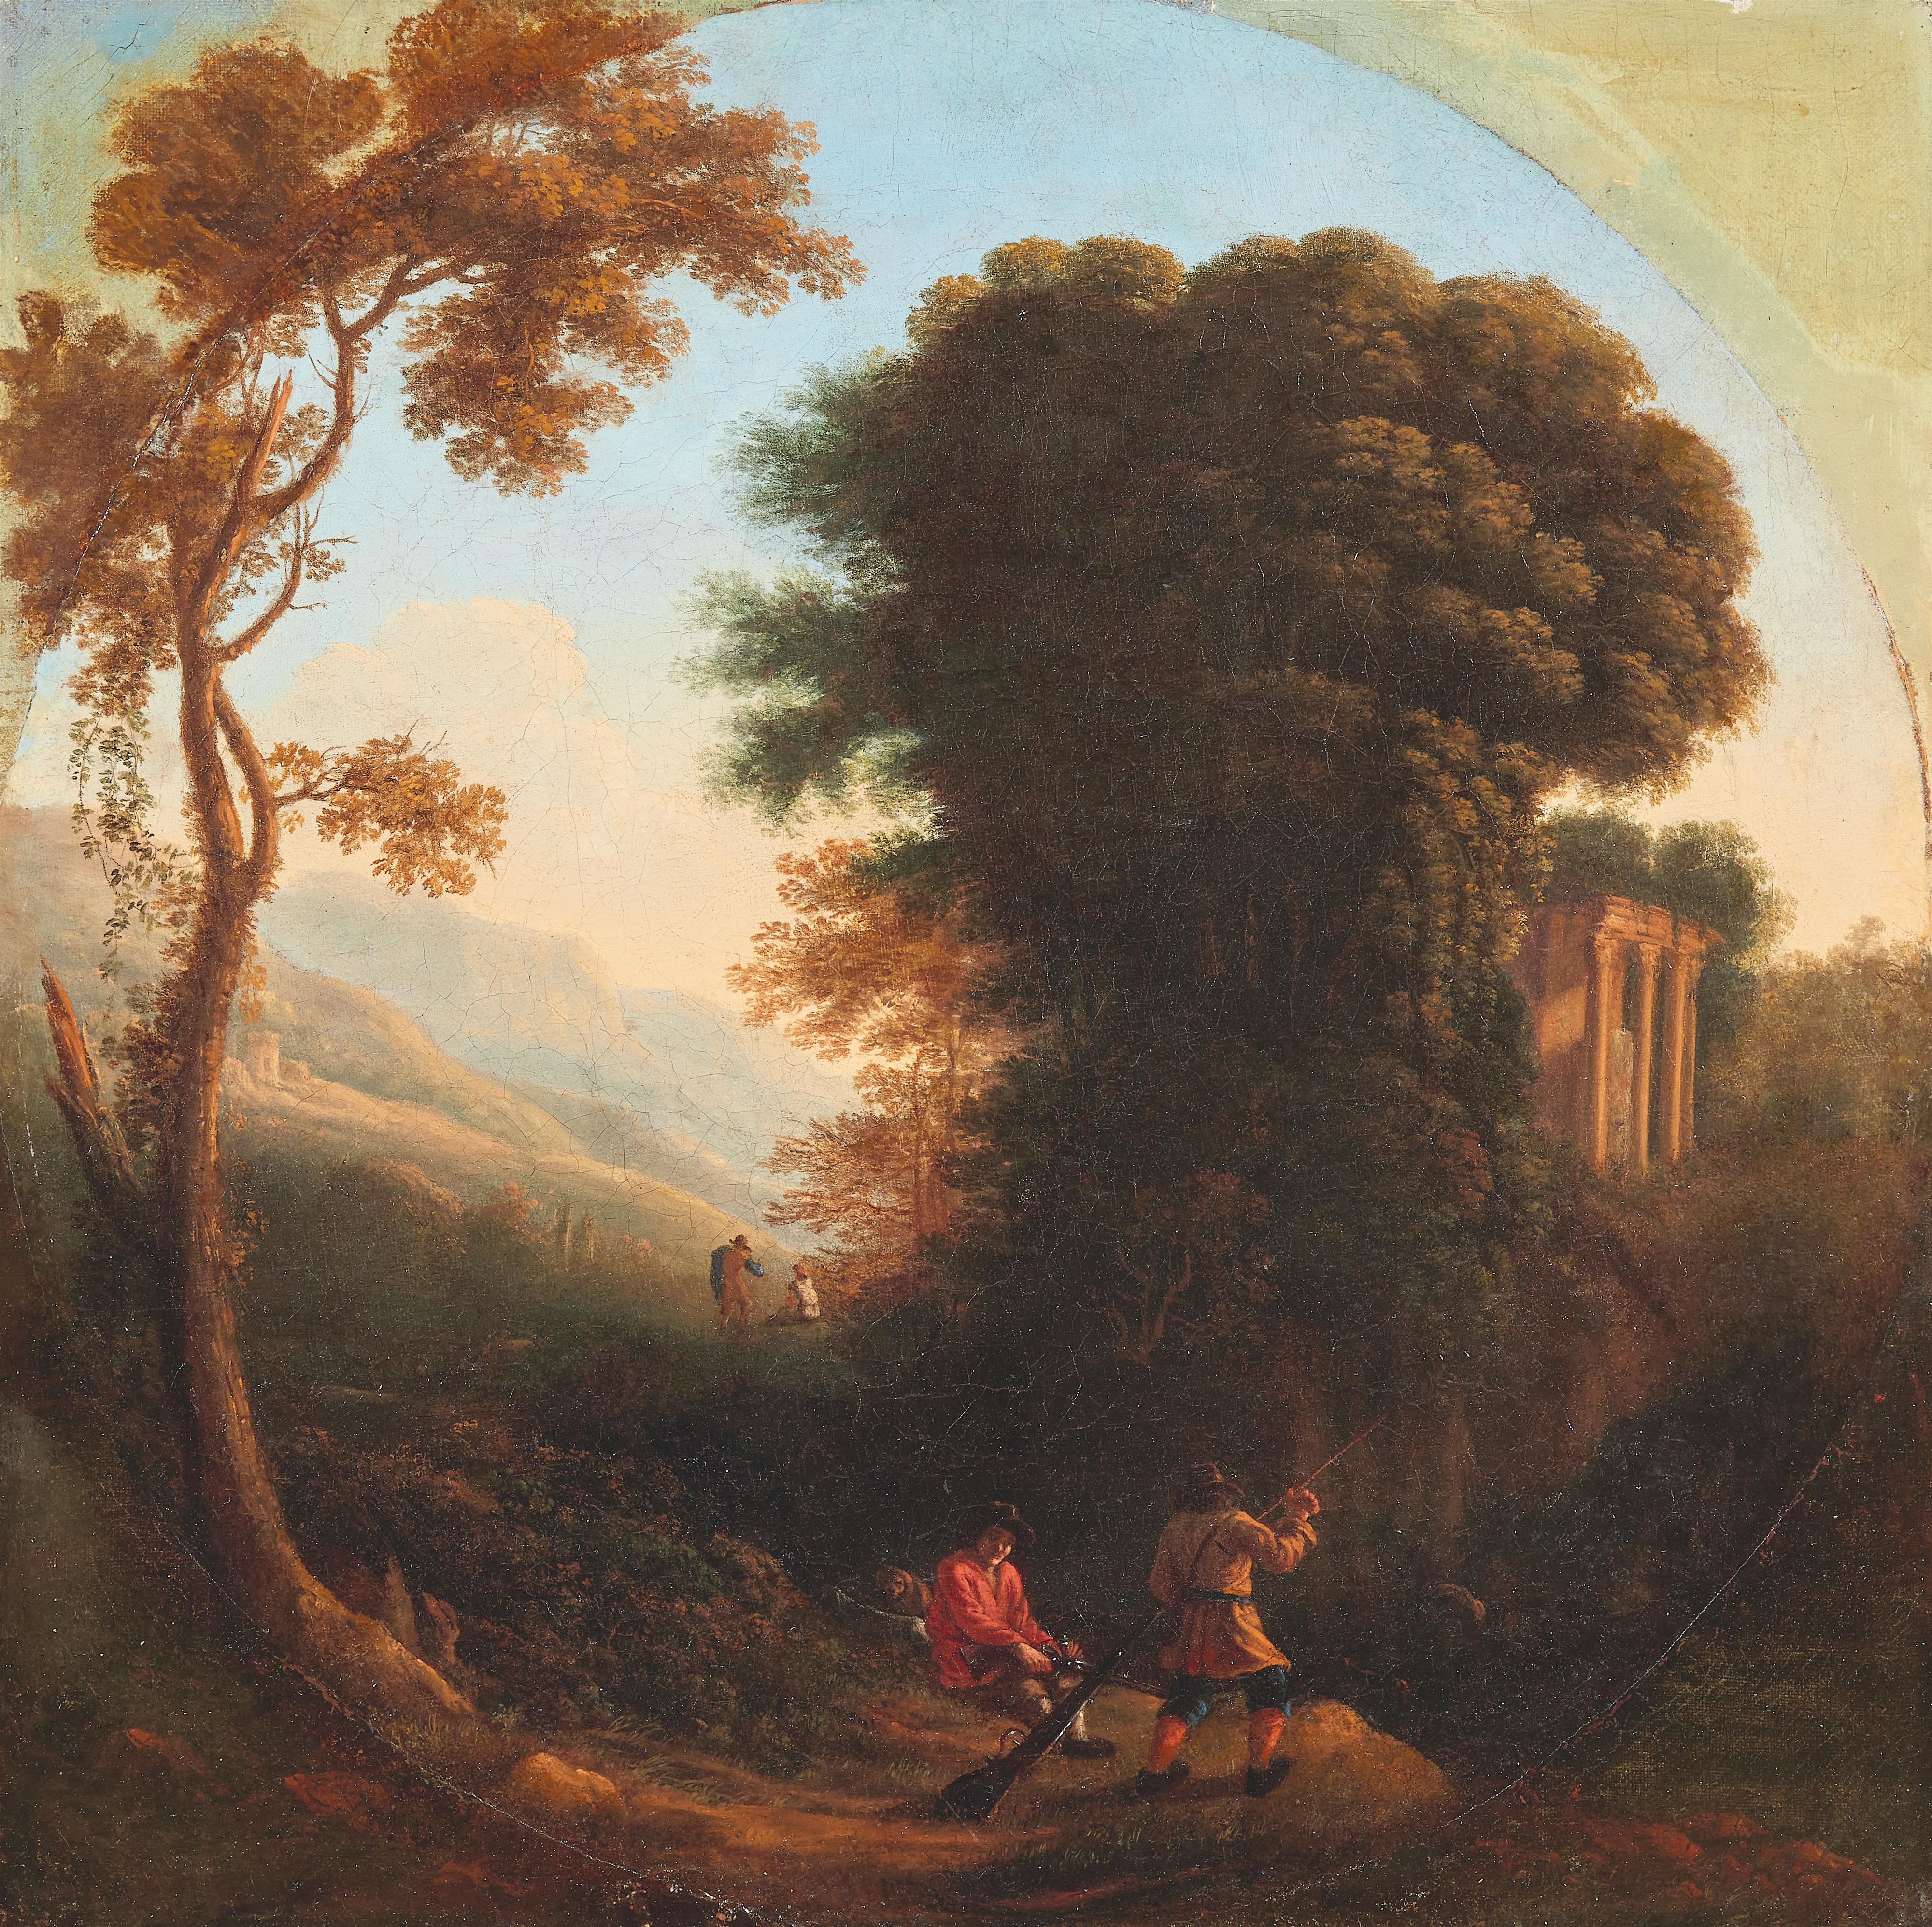 Jan Asselijn, attributed to - Southern Landscape with two Hunters and Ancient Temple Ruins - image-1